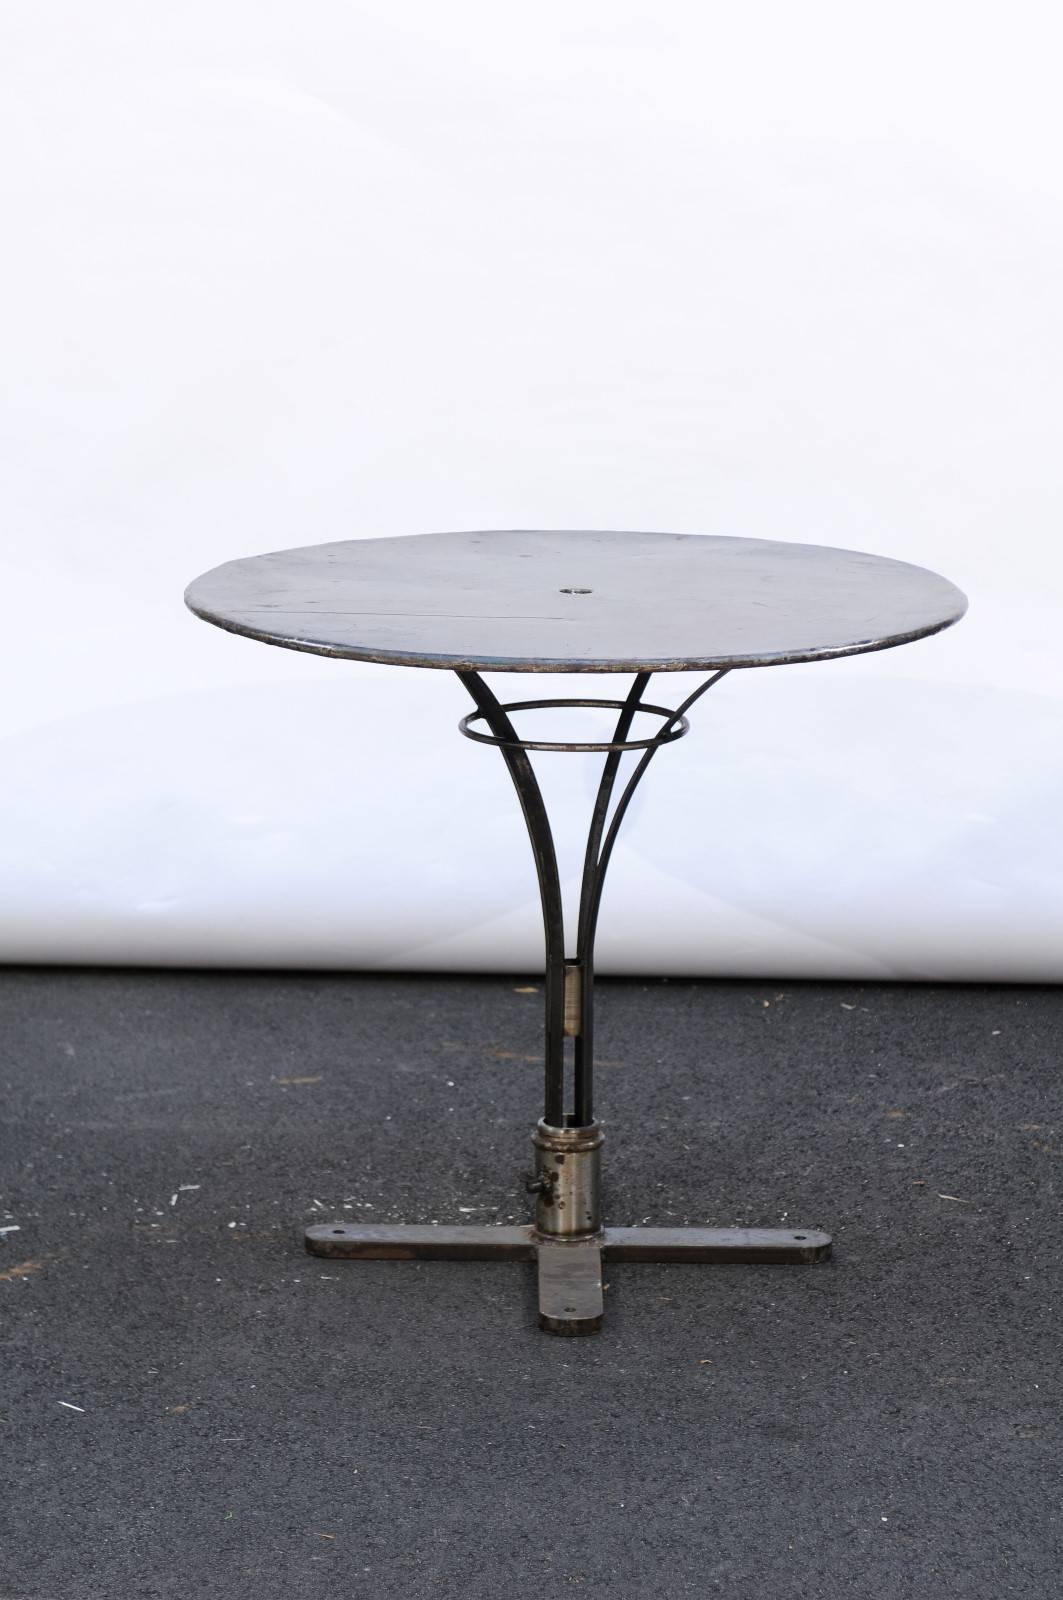 Industrial French Vintage Round Iron Bistrot Table from the Loire Valley with Pedestal Base